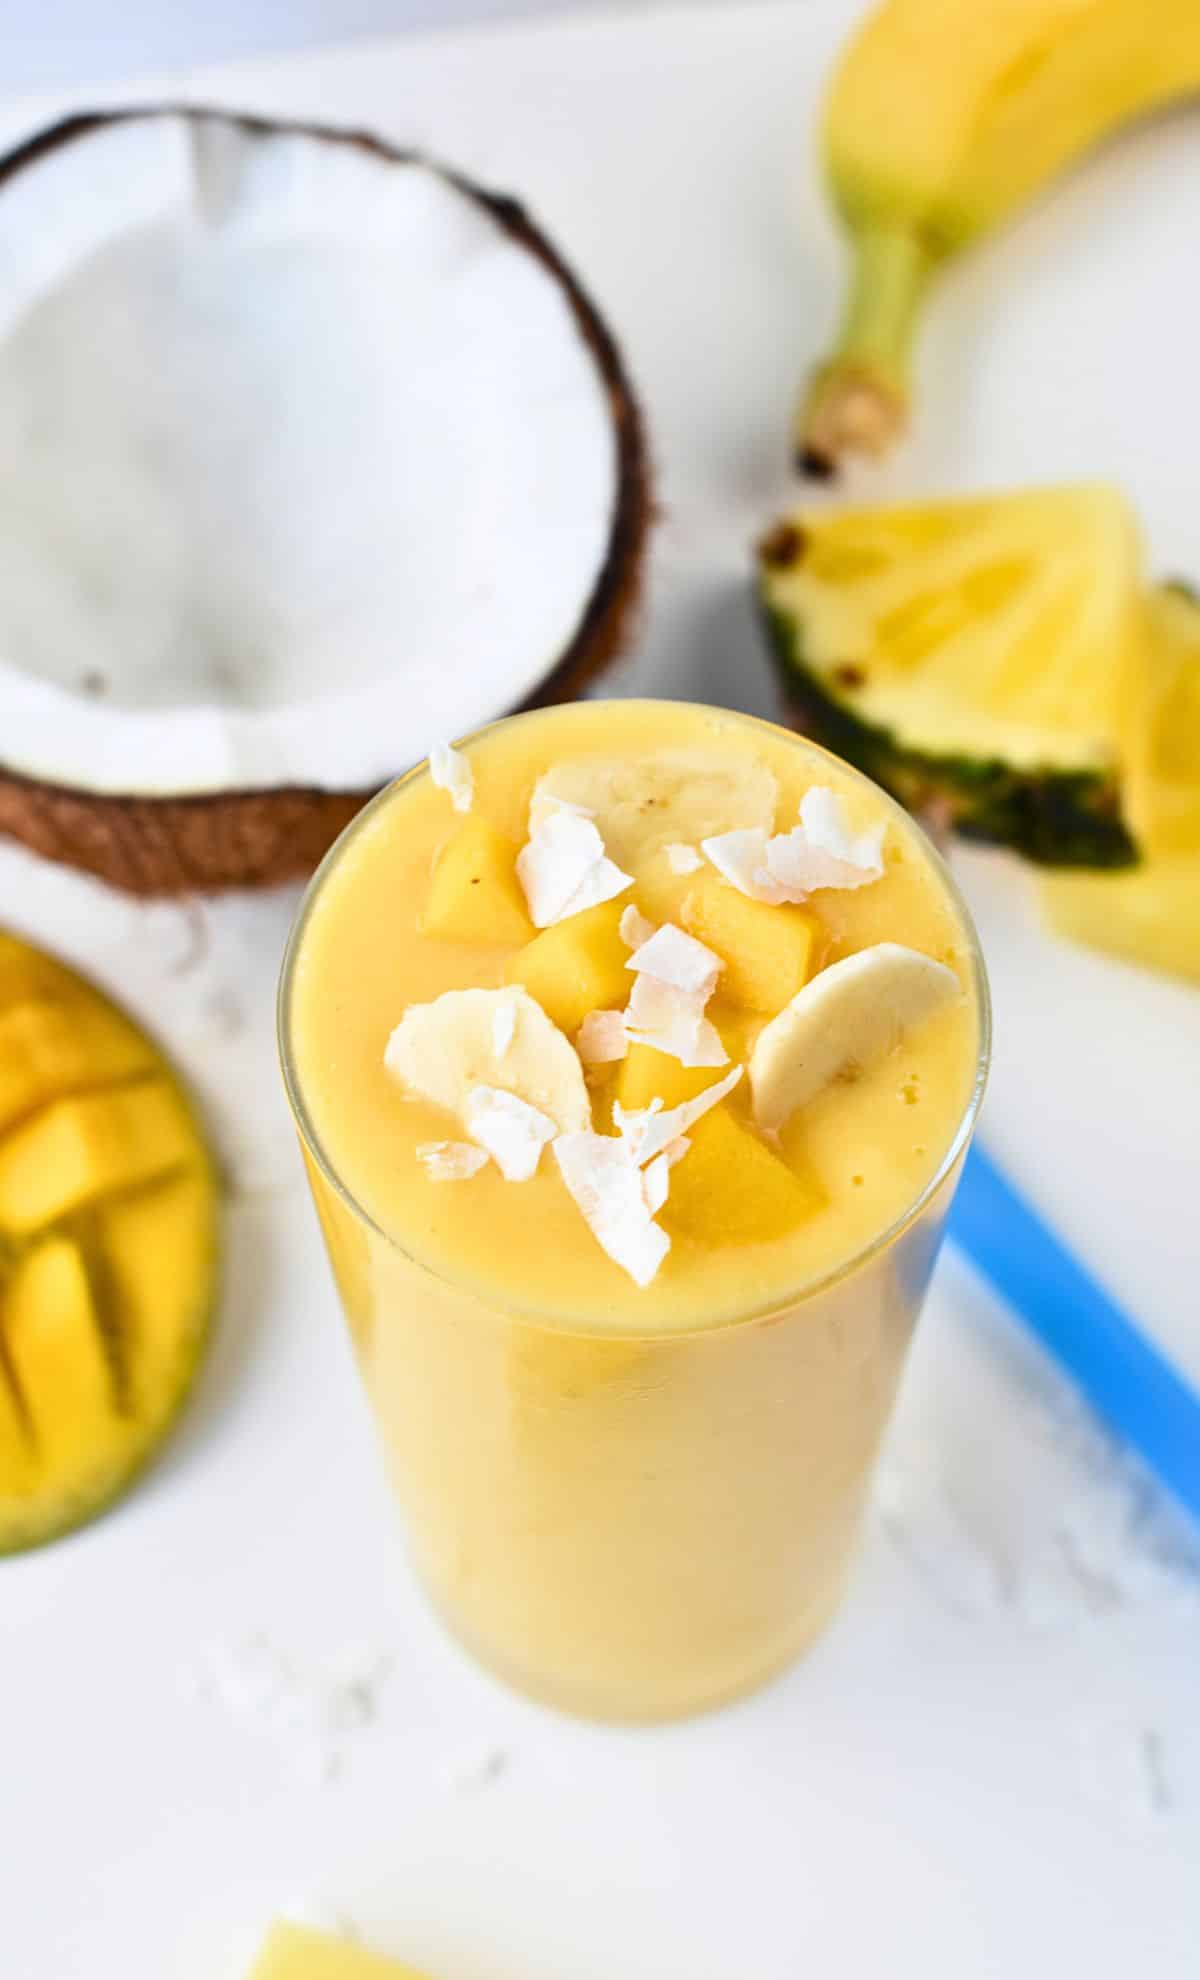 Vegan Tropical Smoothie in a large glass decorated with coconut flakes and banana slices.